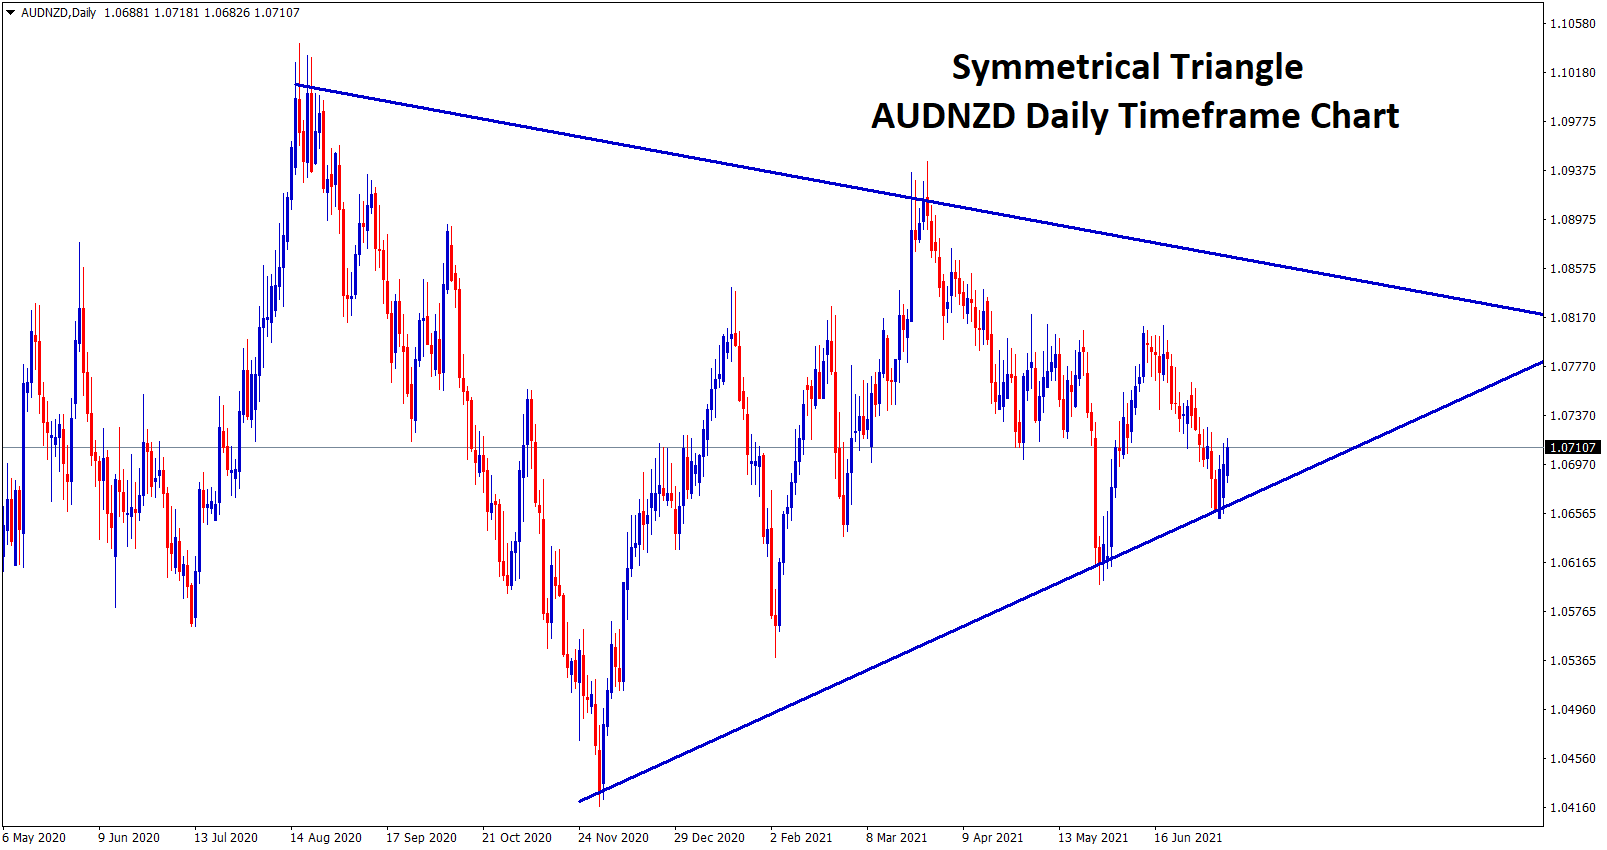 AUDNZD has formed a Symmetrical Triangle pattern in the daily timeframe